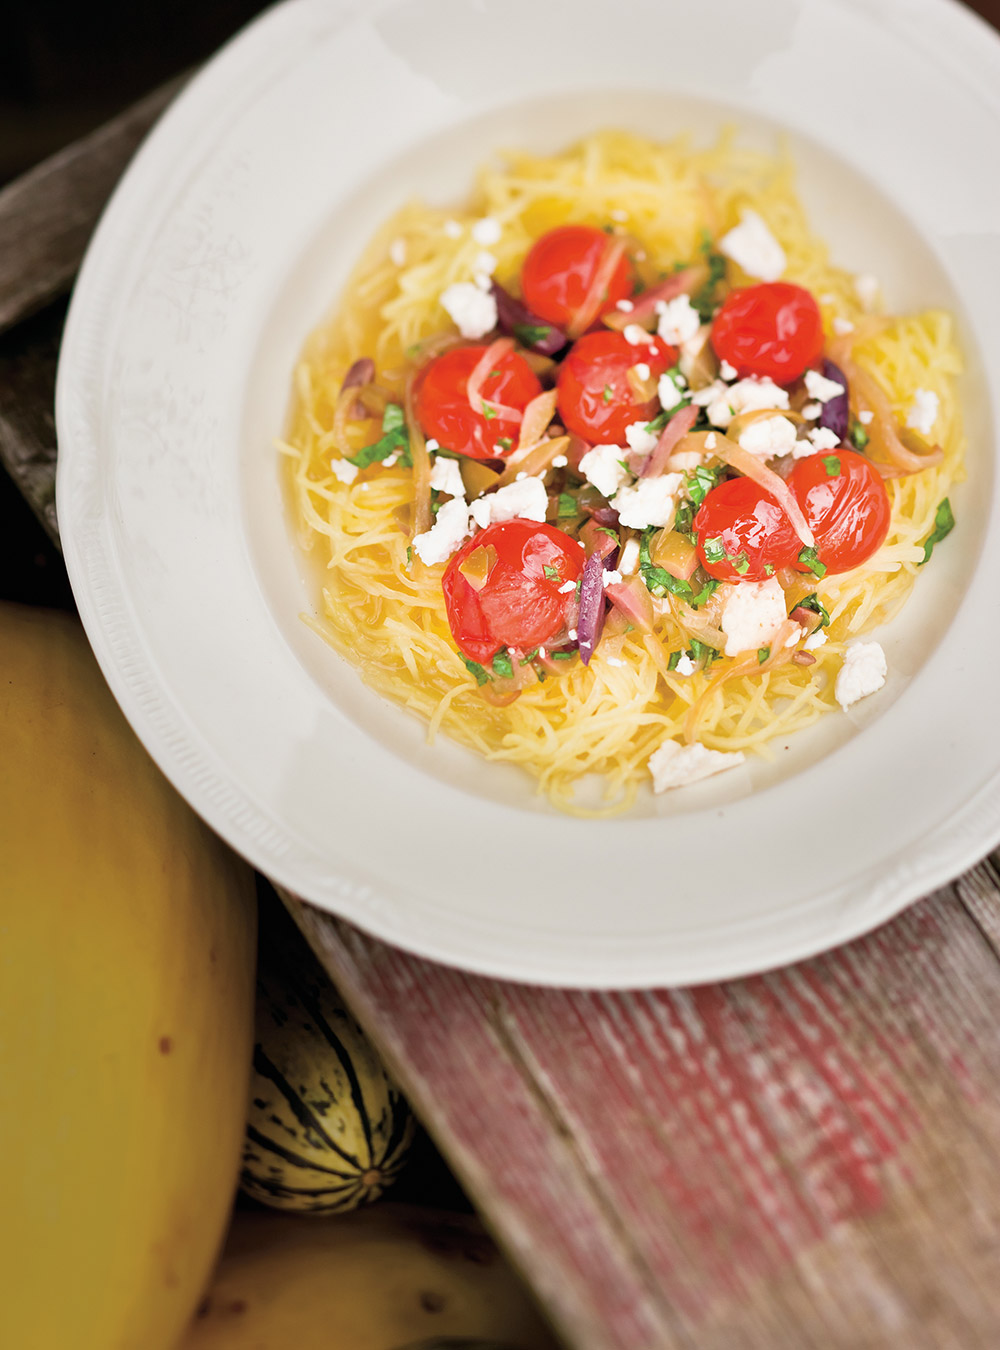 Spaghetti Squash with Onions, Tomatoes, and Olives